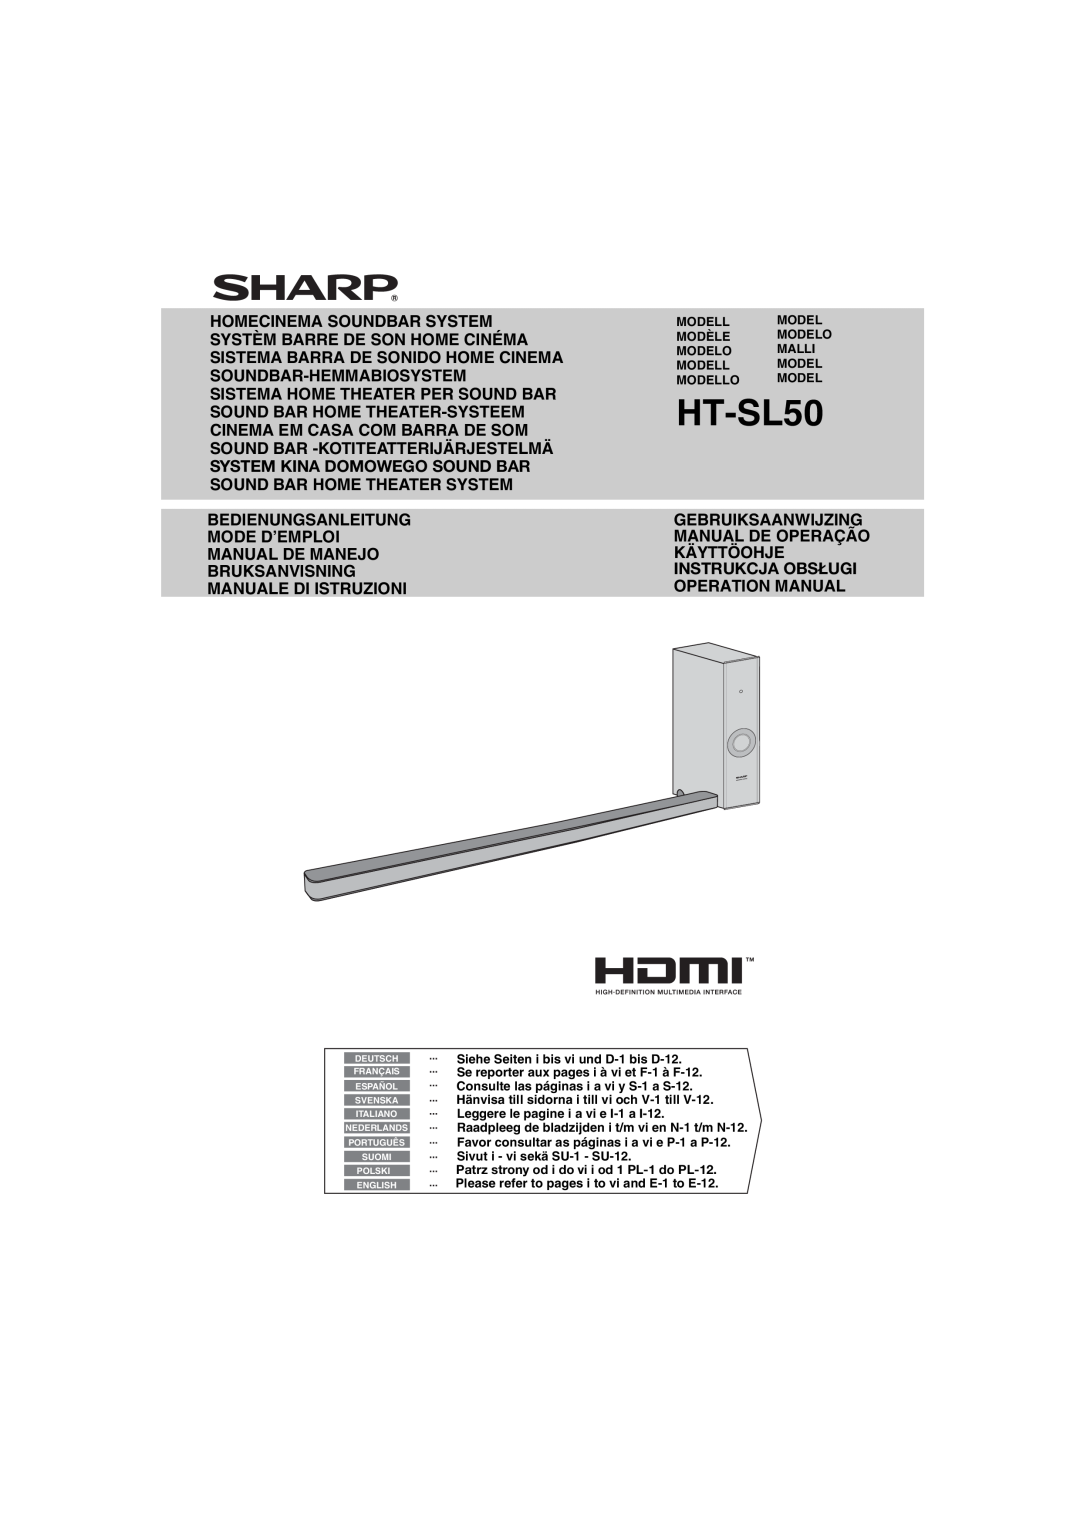 Sharp HT-SL50 operation manual TINSZA935AWZZ, Model, Recommended Connection, TV Type, Cec Function, Connection Method 